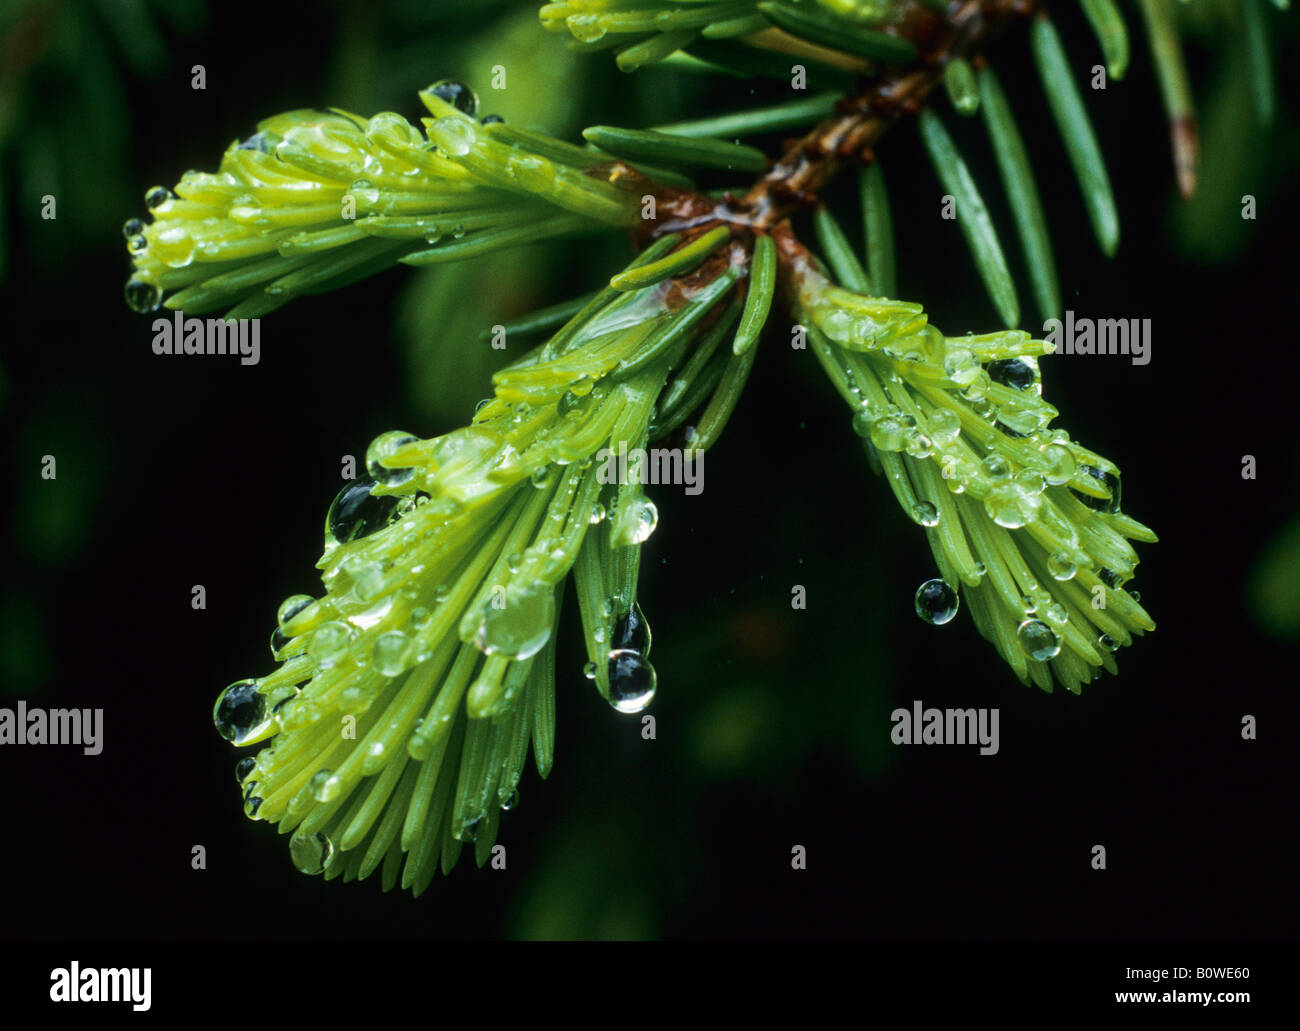 Drops of water on a young spruce twig (Picea) Stock Photo